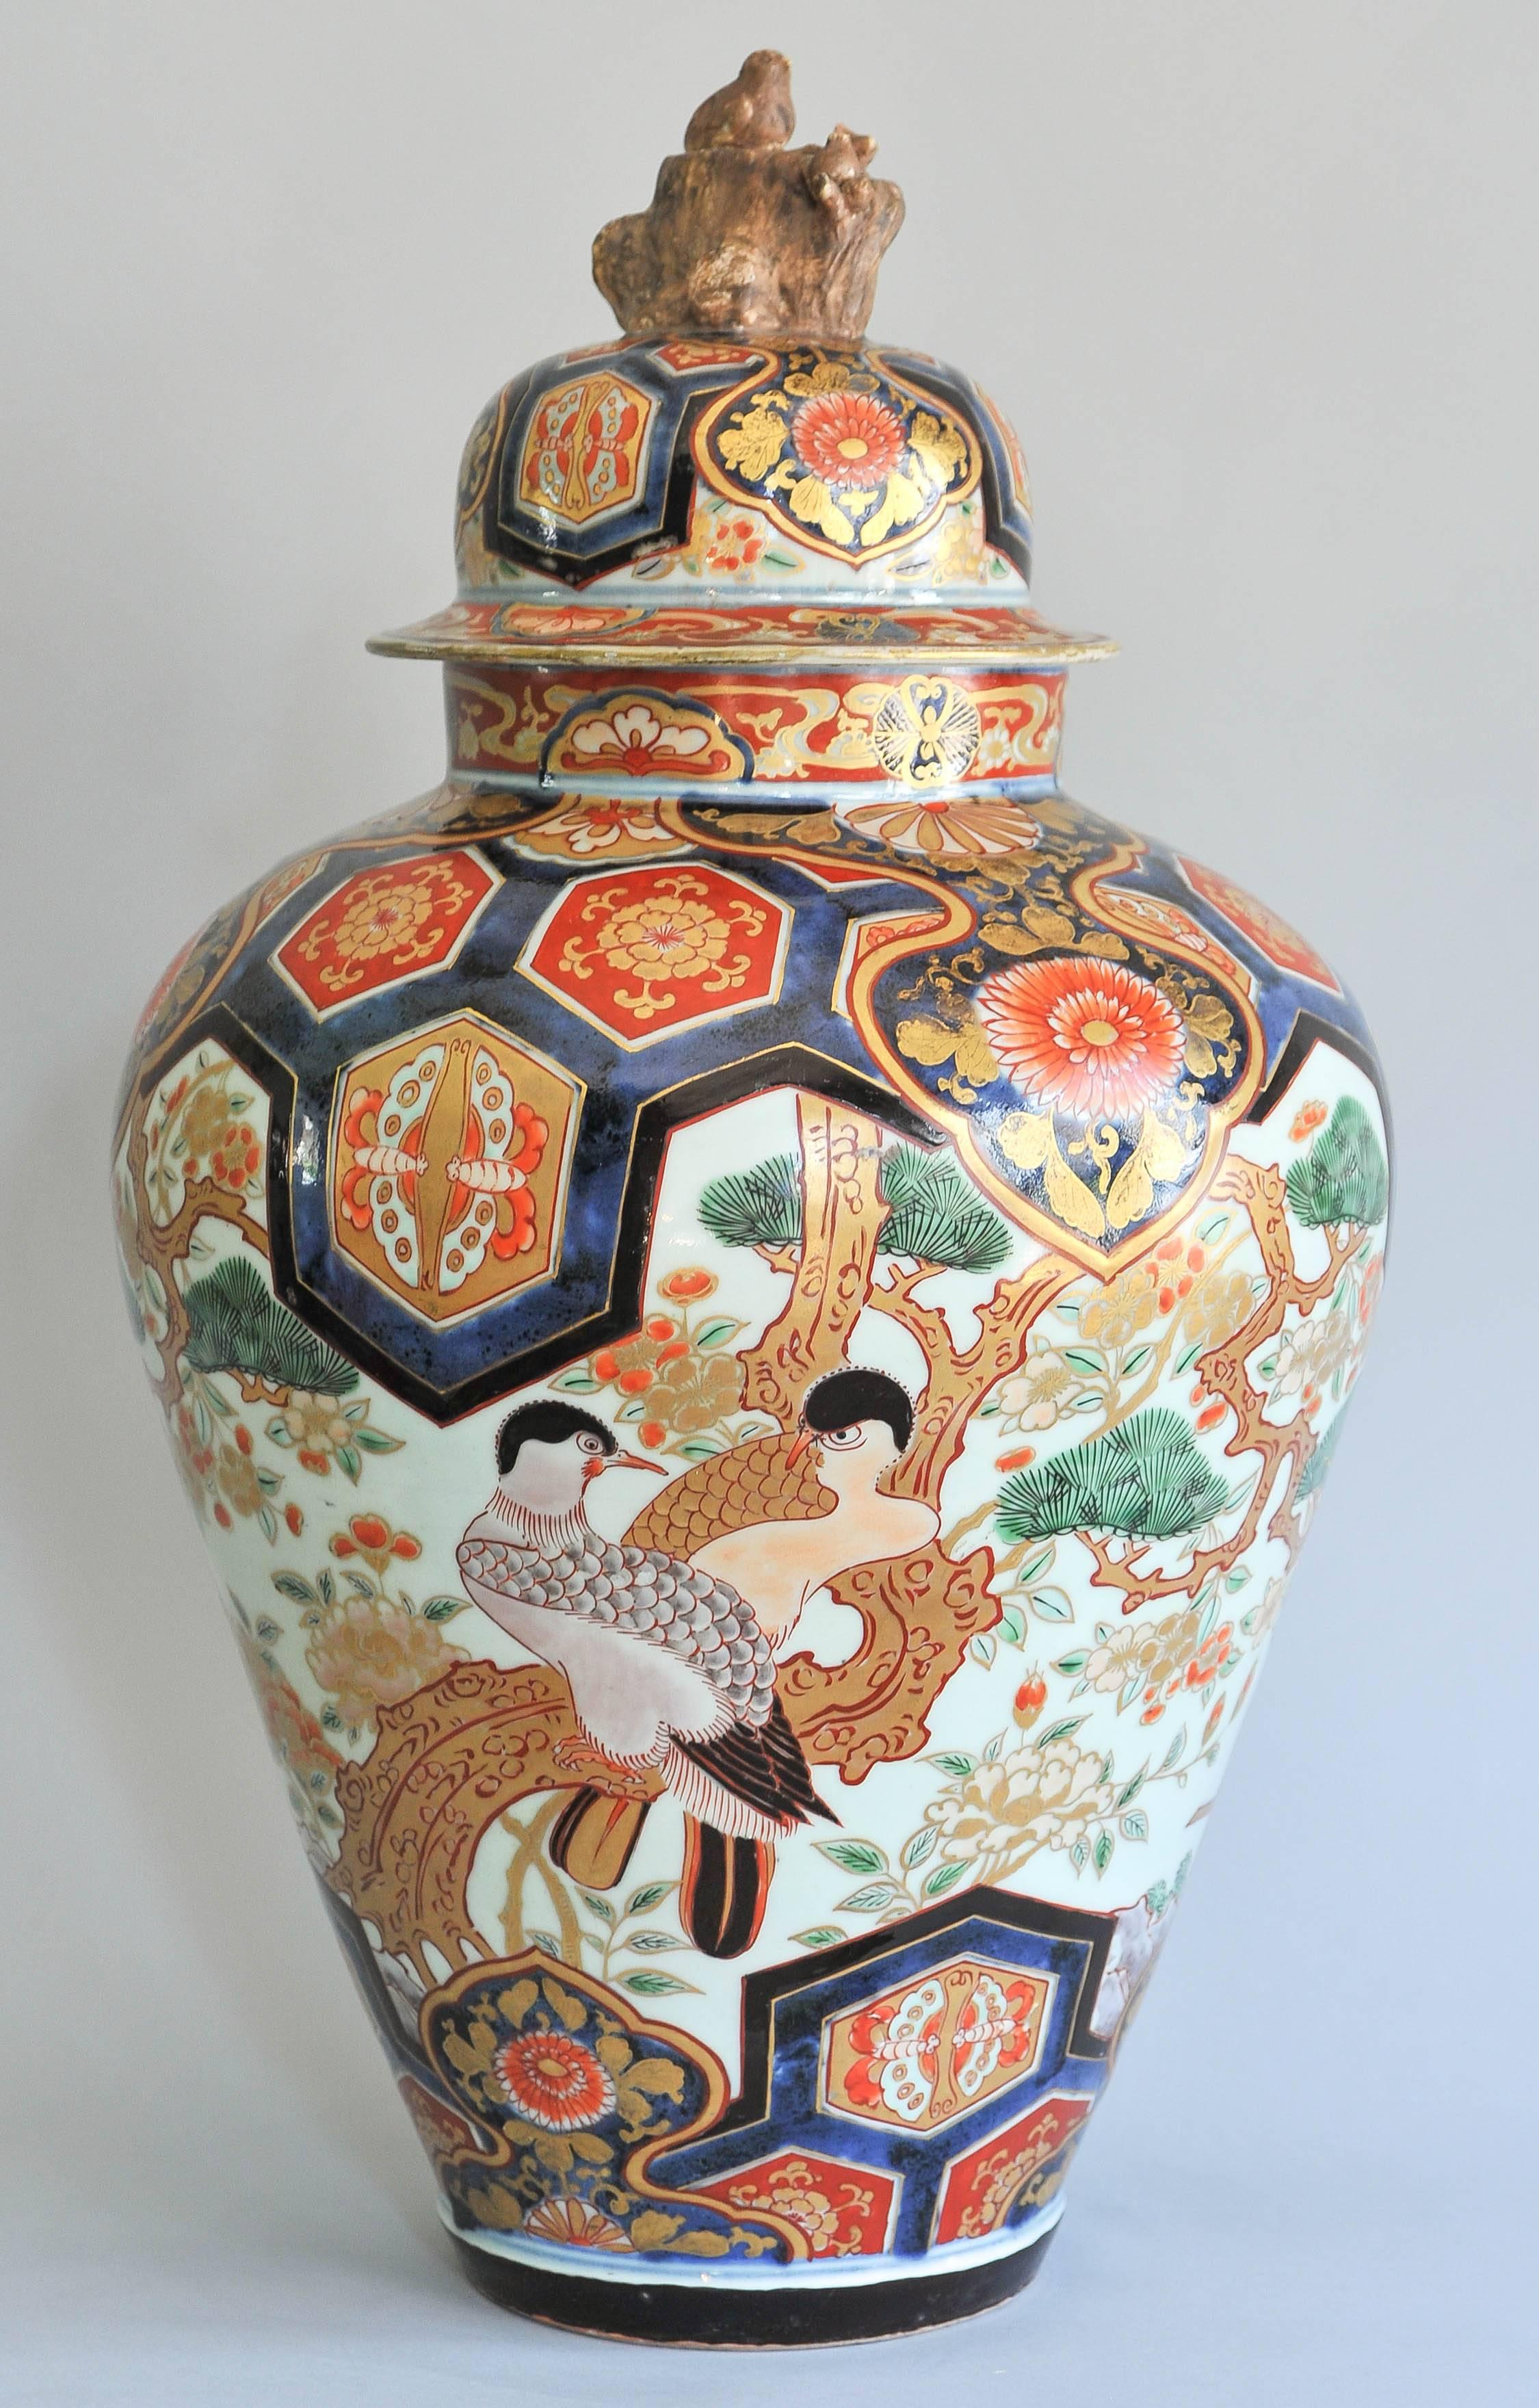 This large Japanese Imari vase, dating from circa 1700, features an unusual decoration depicting two large quails perching on a tree branch on a blue background with hexagons panels depicting butterflies and stylized flowers.
The lid depicting same